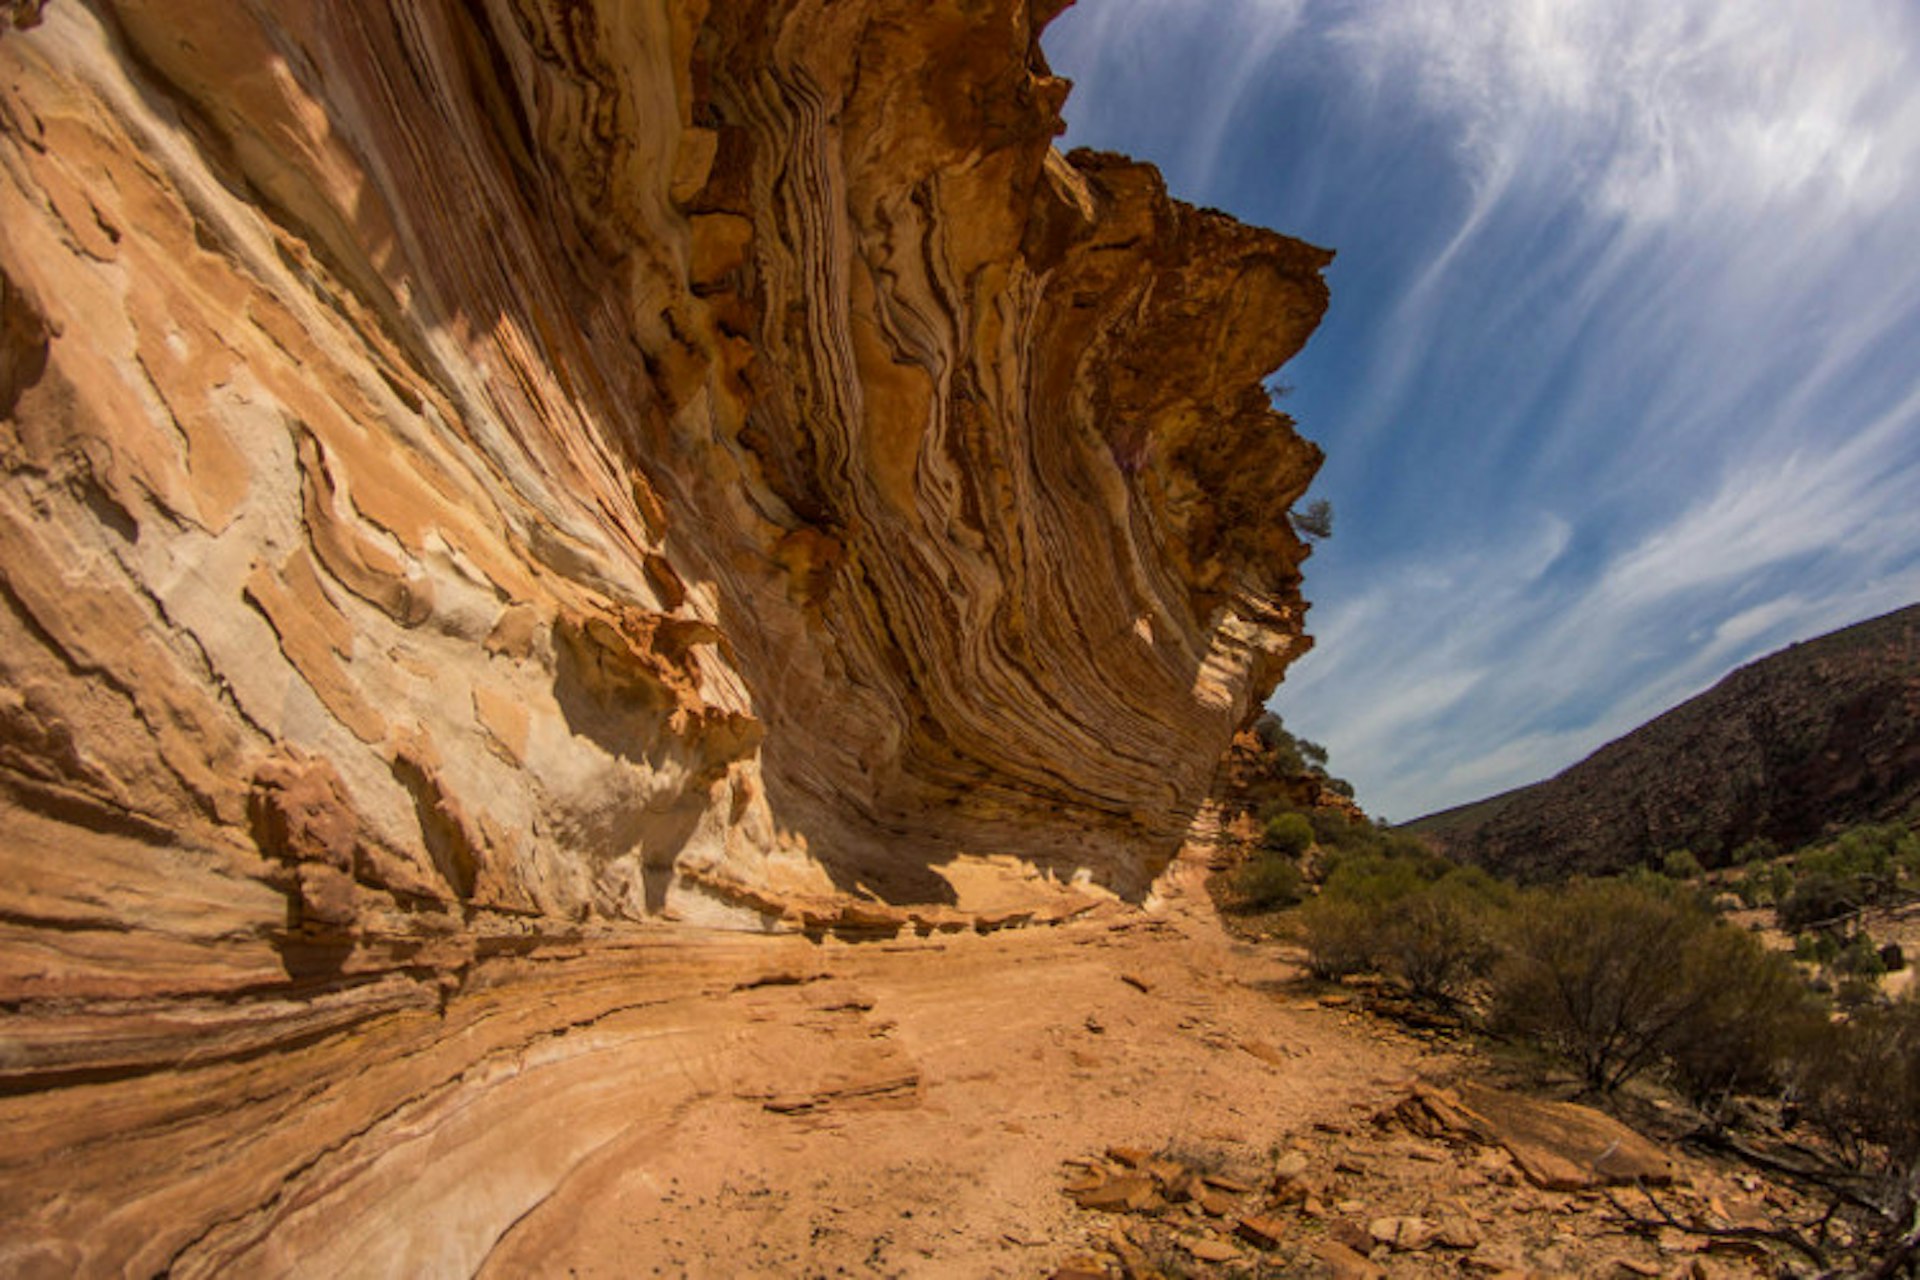 Rock formation at Kalbarri National Park / Image by Matthieu Chatry / CC BY 2.0